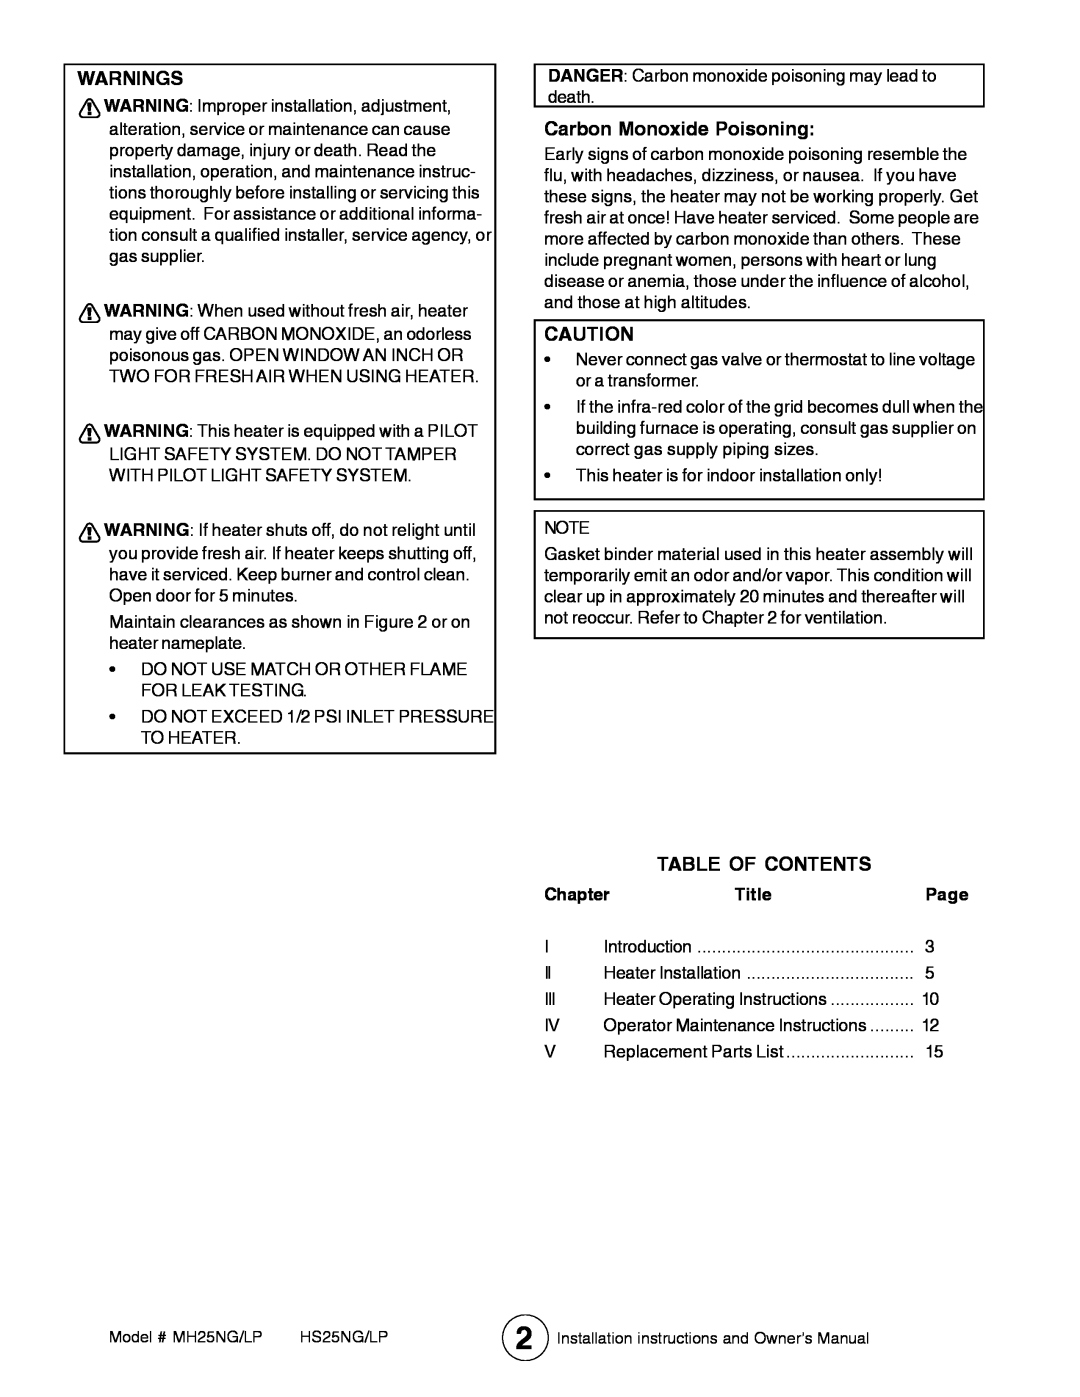 Mr. Heater MH25LP / MH25NG Warnings, Carbon Monoxide Poisoning, Table Of Contents, Chapter, Title, Page 